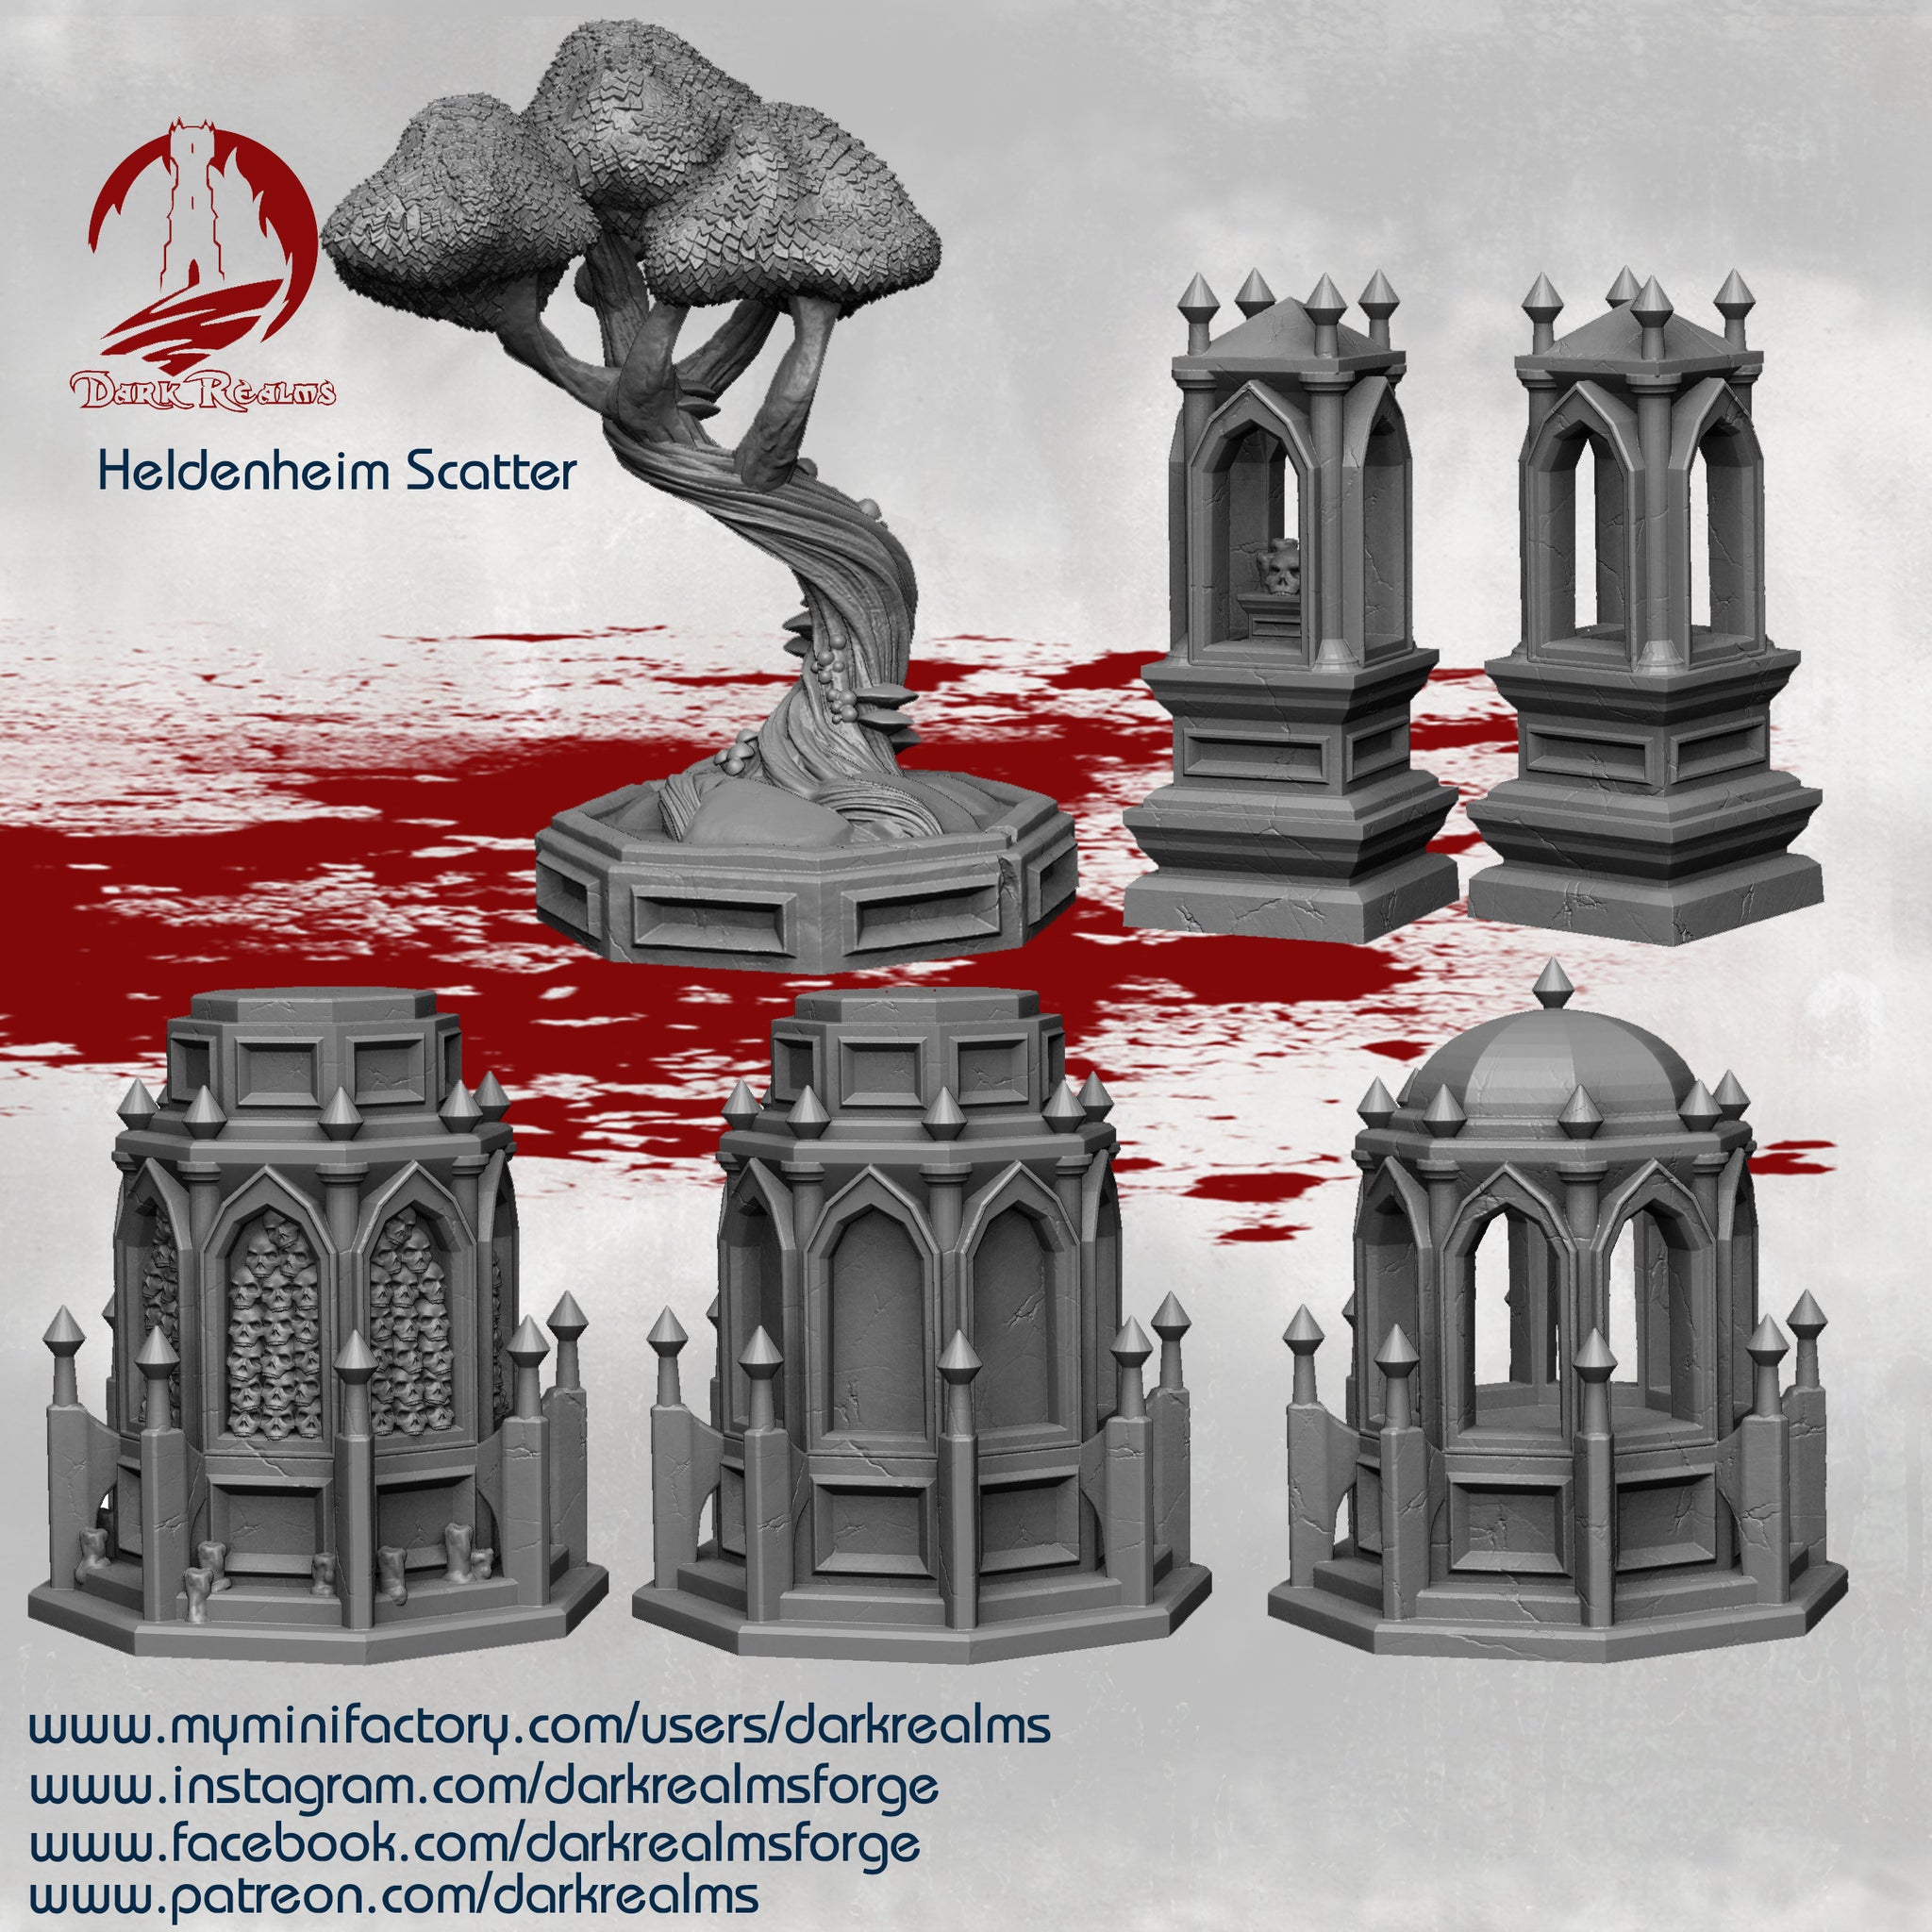 Dark Realms Heldenheim Scatter Terrain pack 3d Printed in Premium PLA, fully cleaned, prepped and ready to prime and paint!